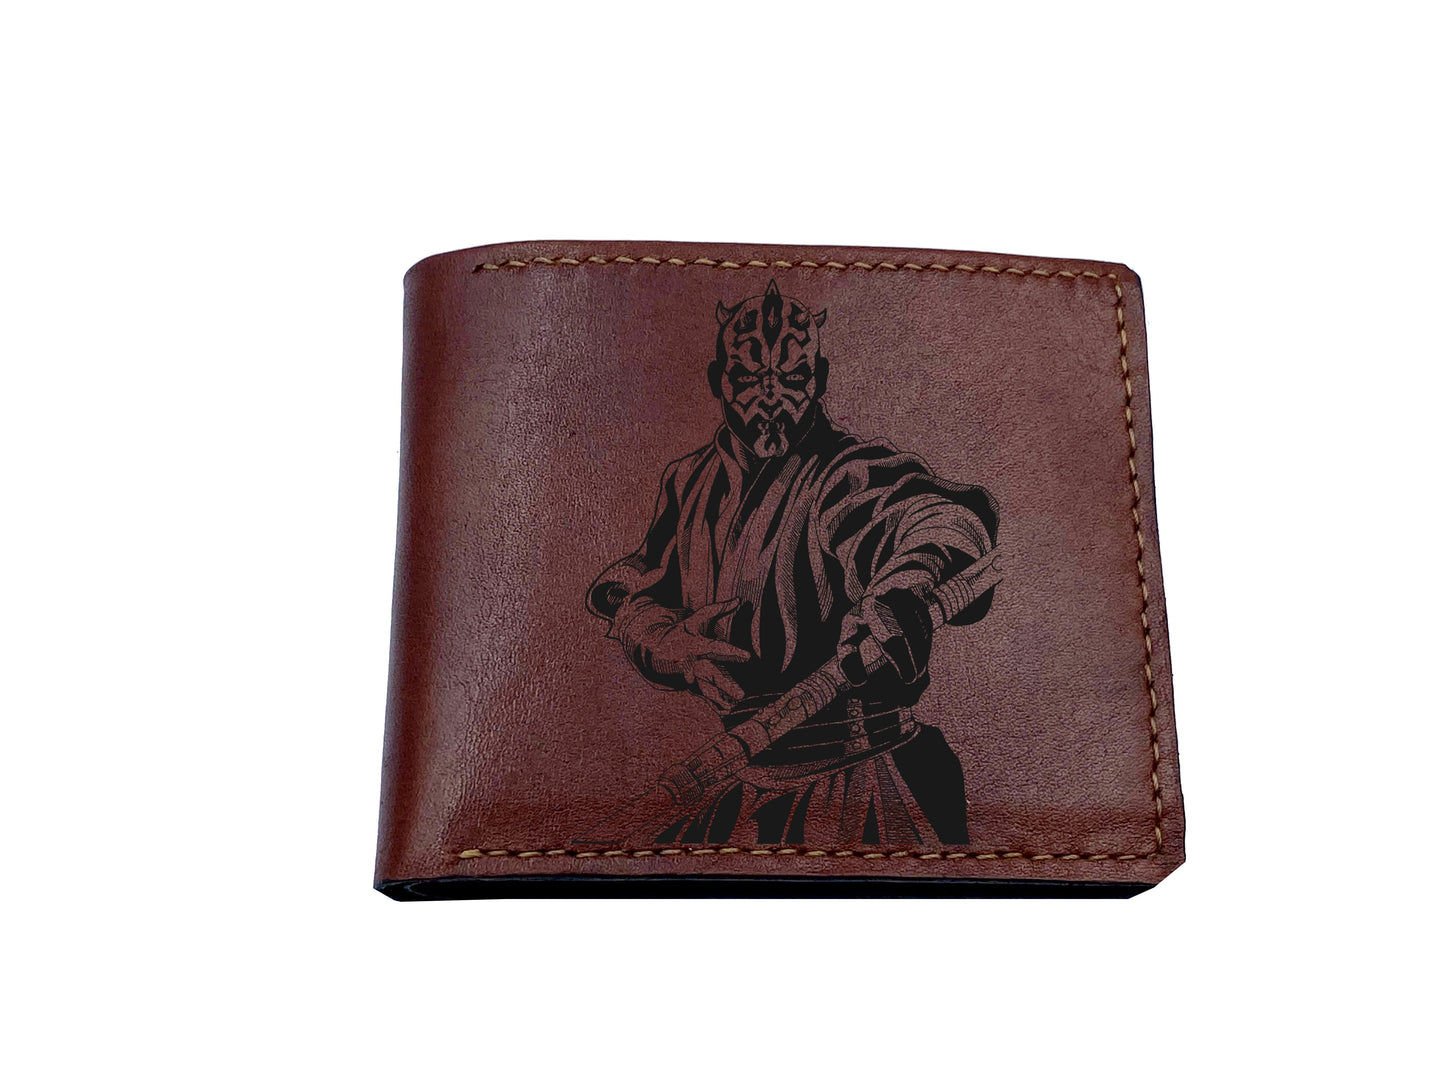 Darth Maul Sith Lord Starwars leather wallet, customized wallet for him, birthday leather anniversary present for men